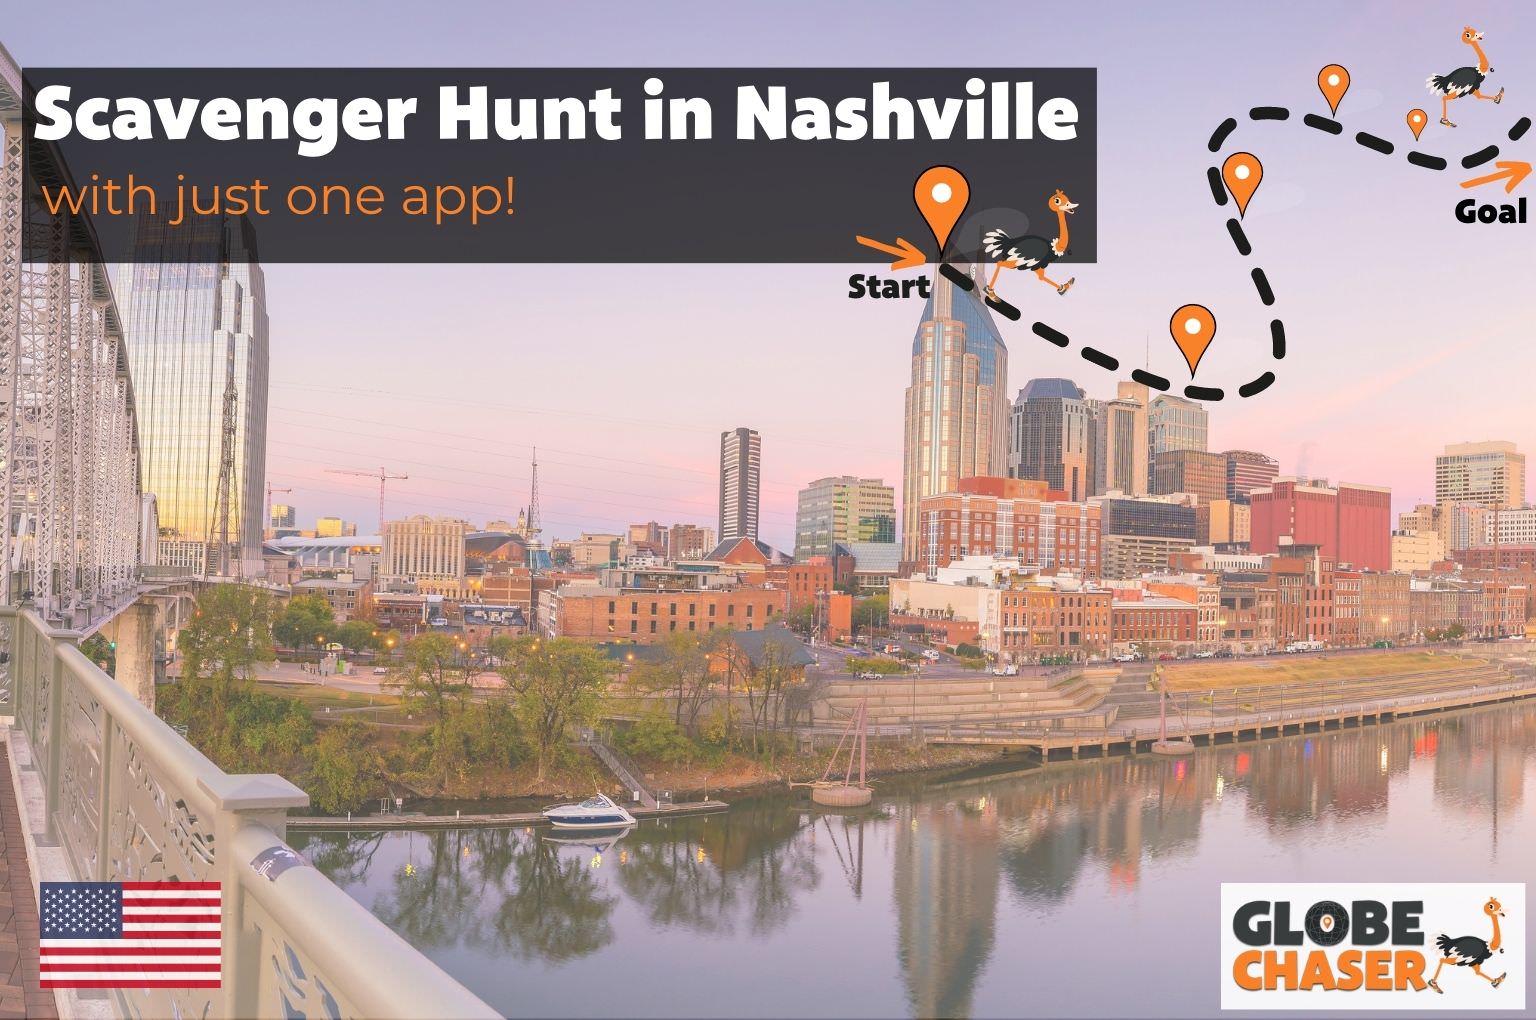 Scavenger Hunt in Nashville, USA - Family Activities with the Globe Chaser App for Outdoor Fun